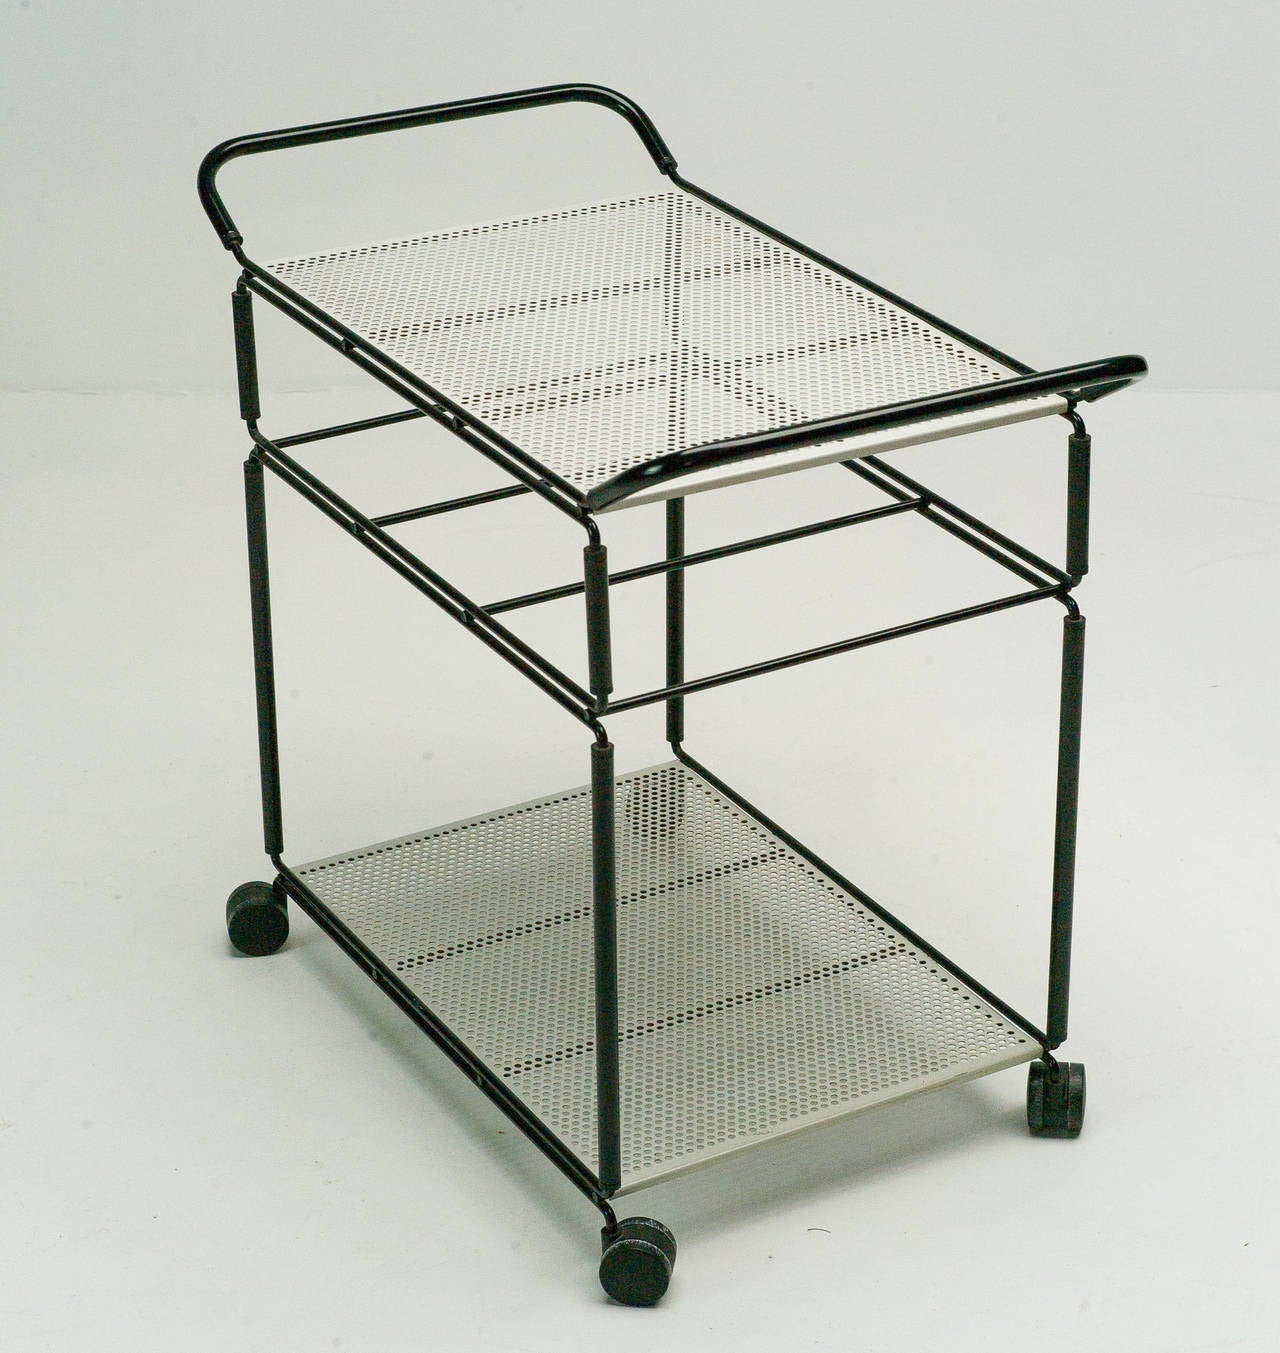 Dutch Industrial tea trolley, most likely made by Pilastro.
Competitive worldwide shipping available. Please ask for our in-house crating and shipping services.